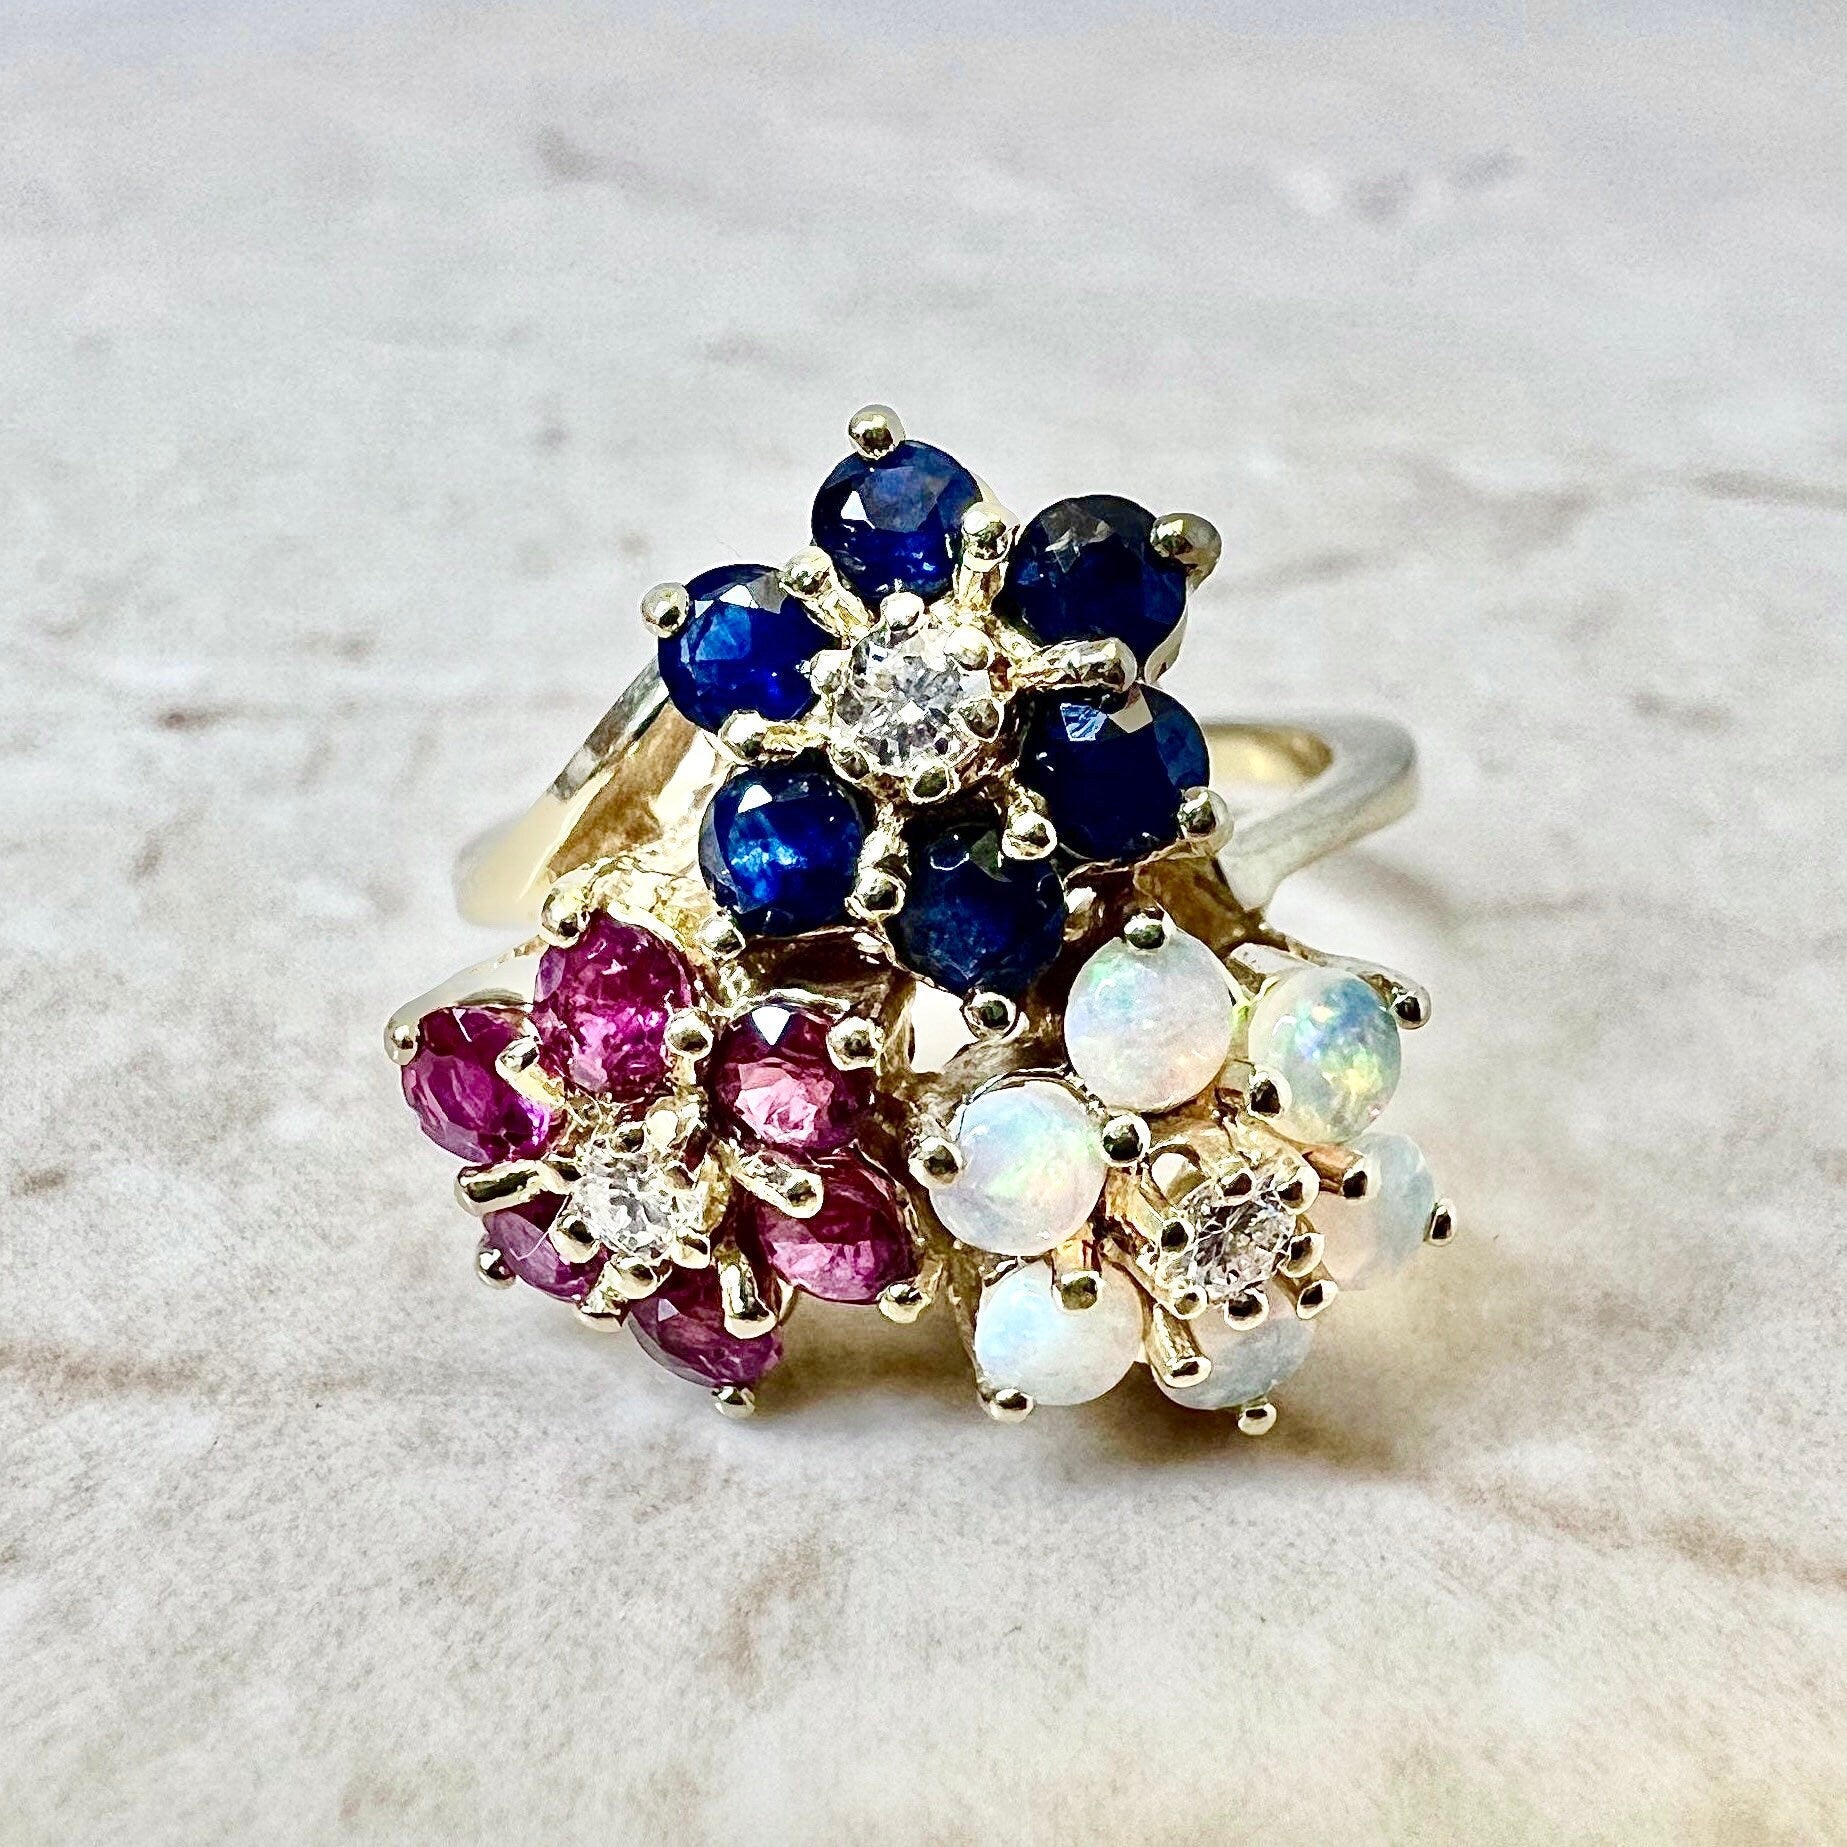 14K Floral Ruby, Sapphire, Opal & Diamond Cocktail Ring - Yellow Gold Flower Ring - Birthstone Ring - Best Birthday Gift For Her